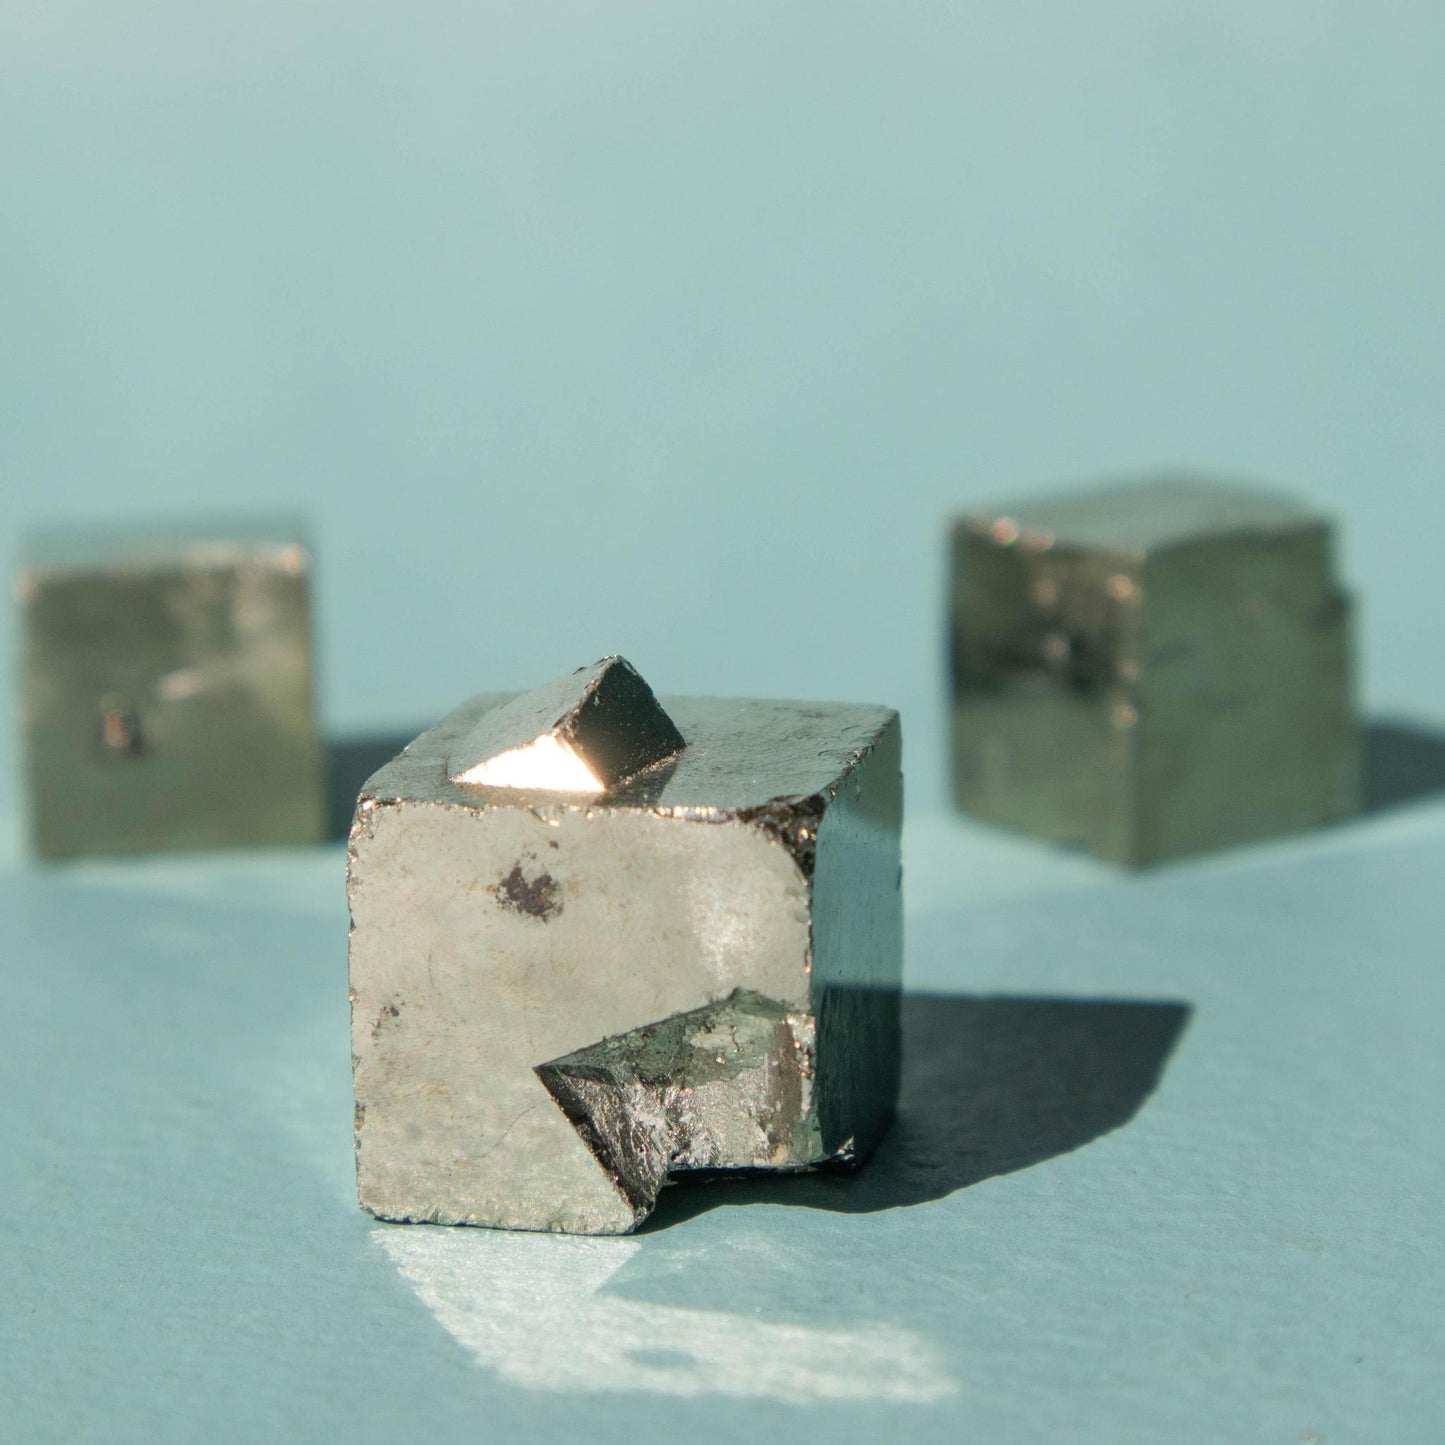 pyrite, pyrite cube, crystal cube, pyrite crystal, pyrite stone, pyrite properties, pyrite meaning